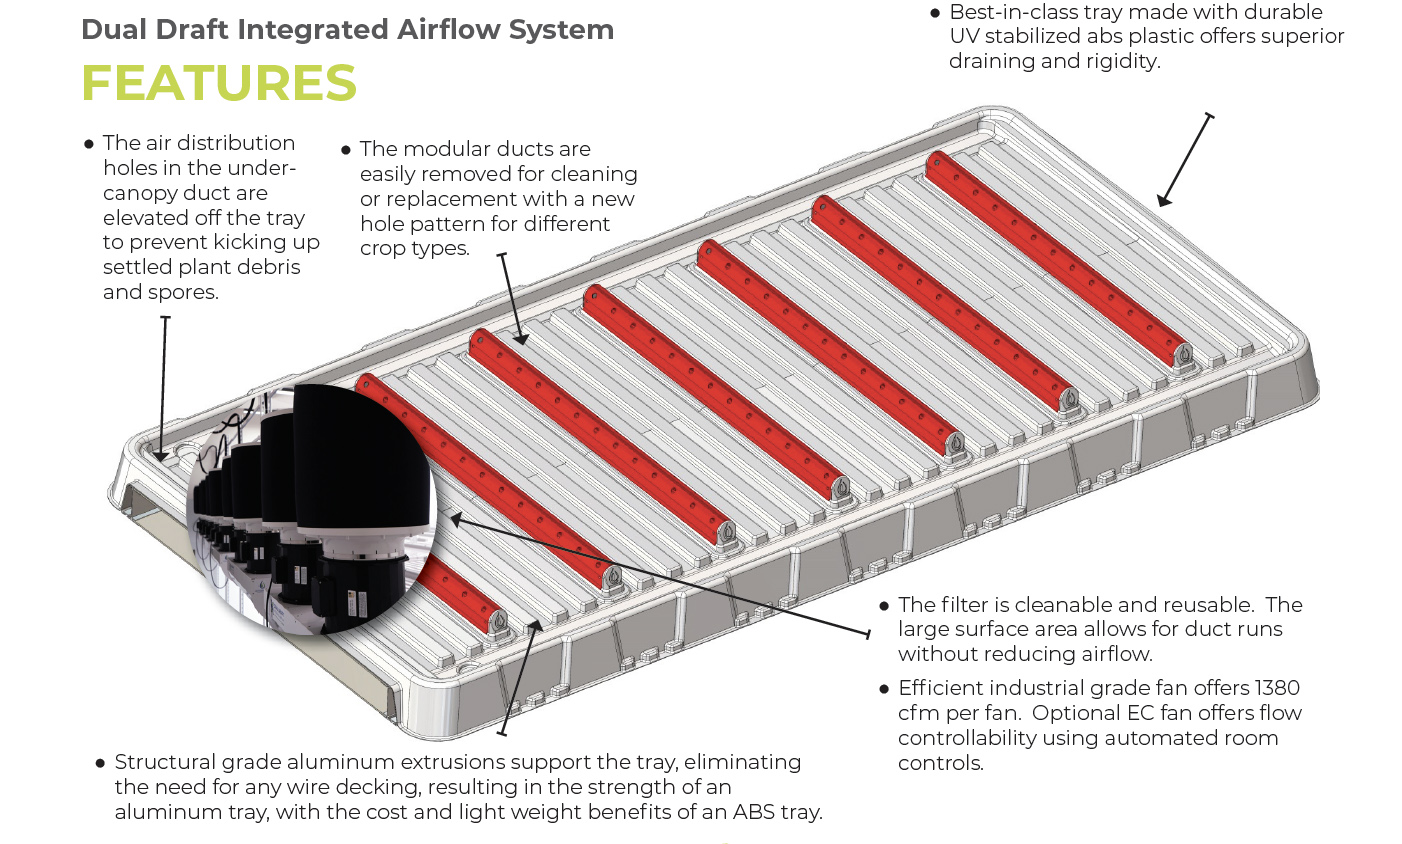 Dual Draft Airflow System Features